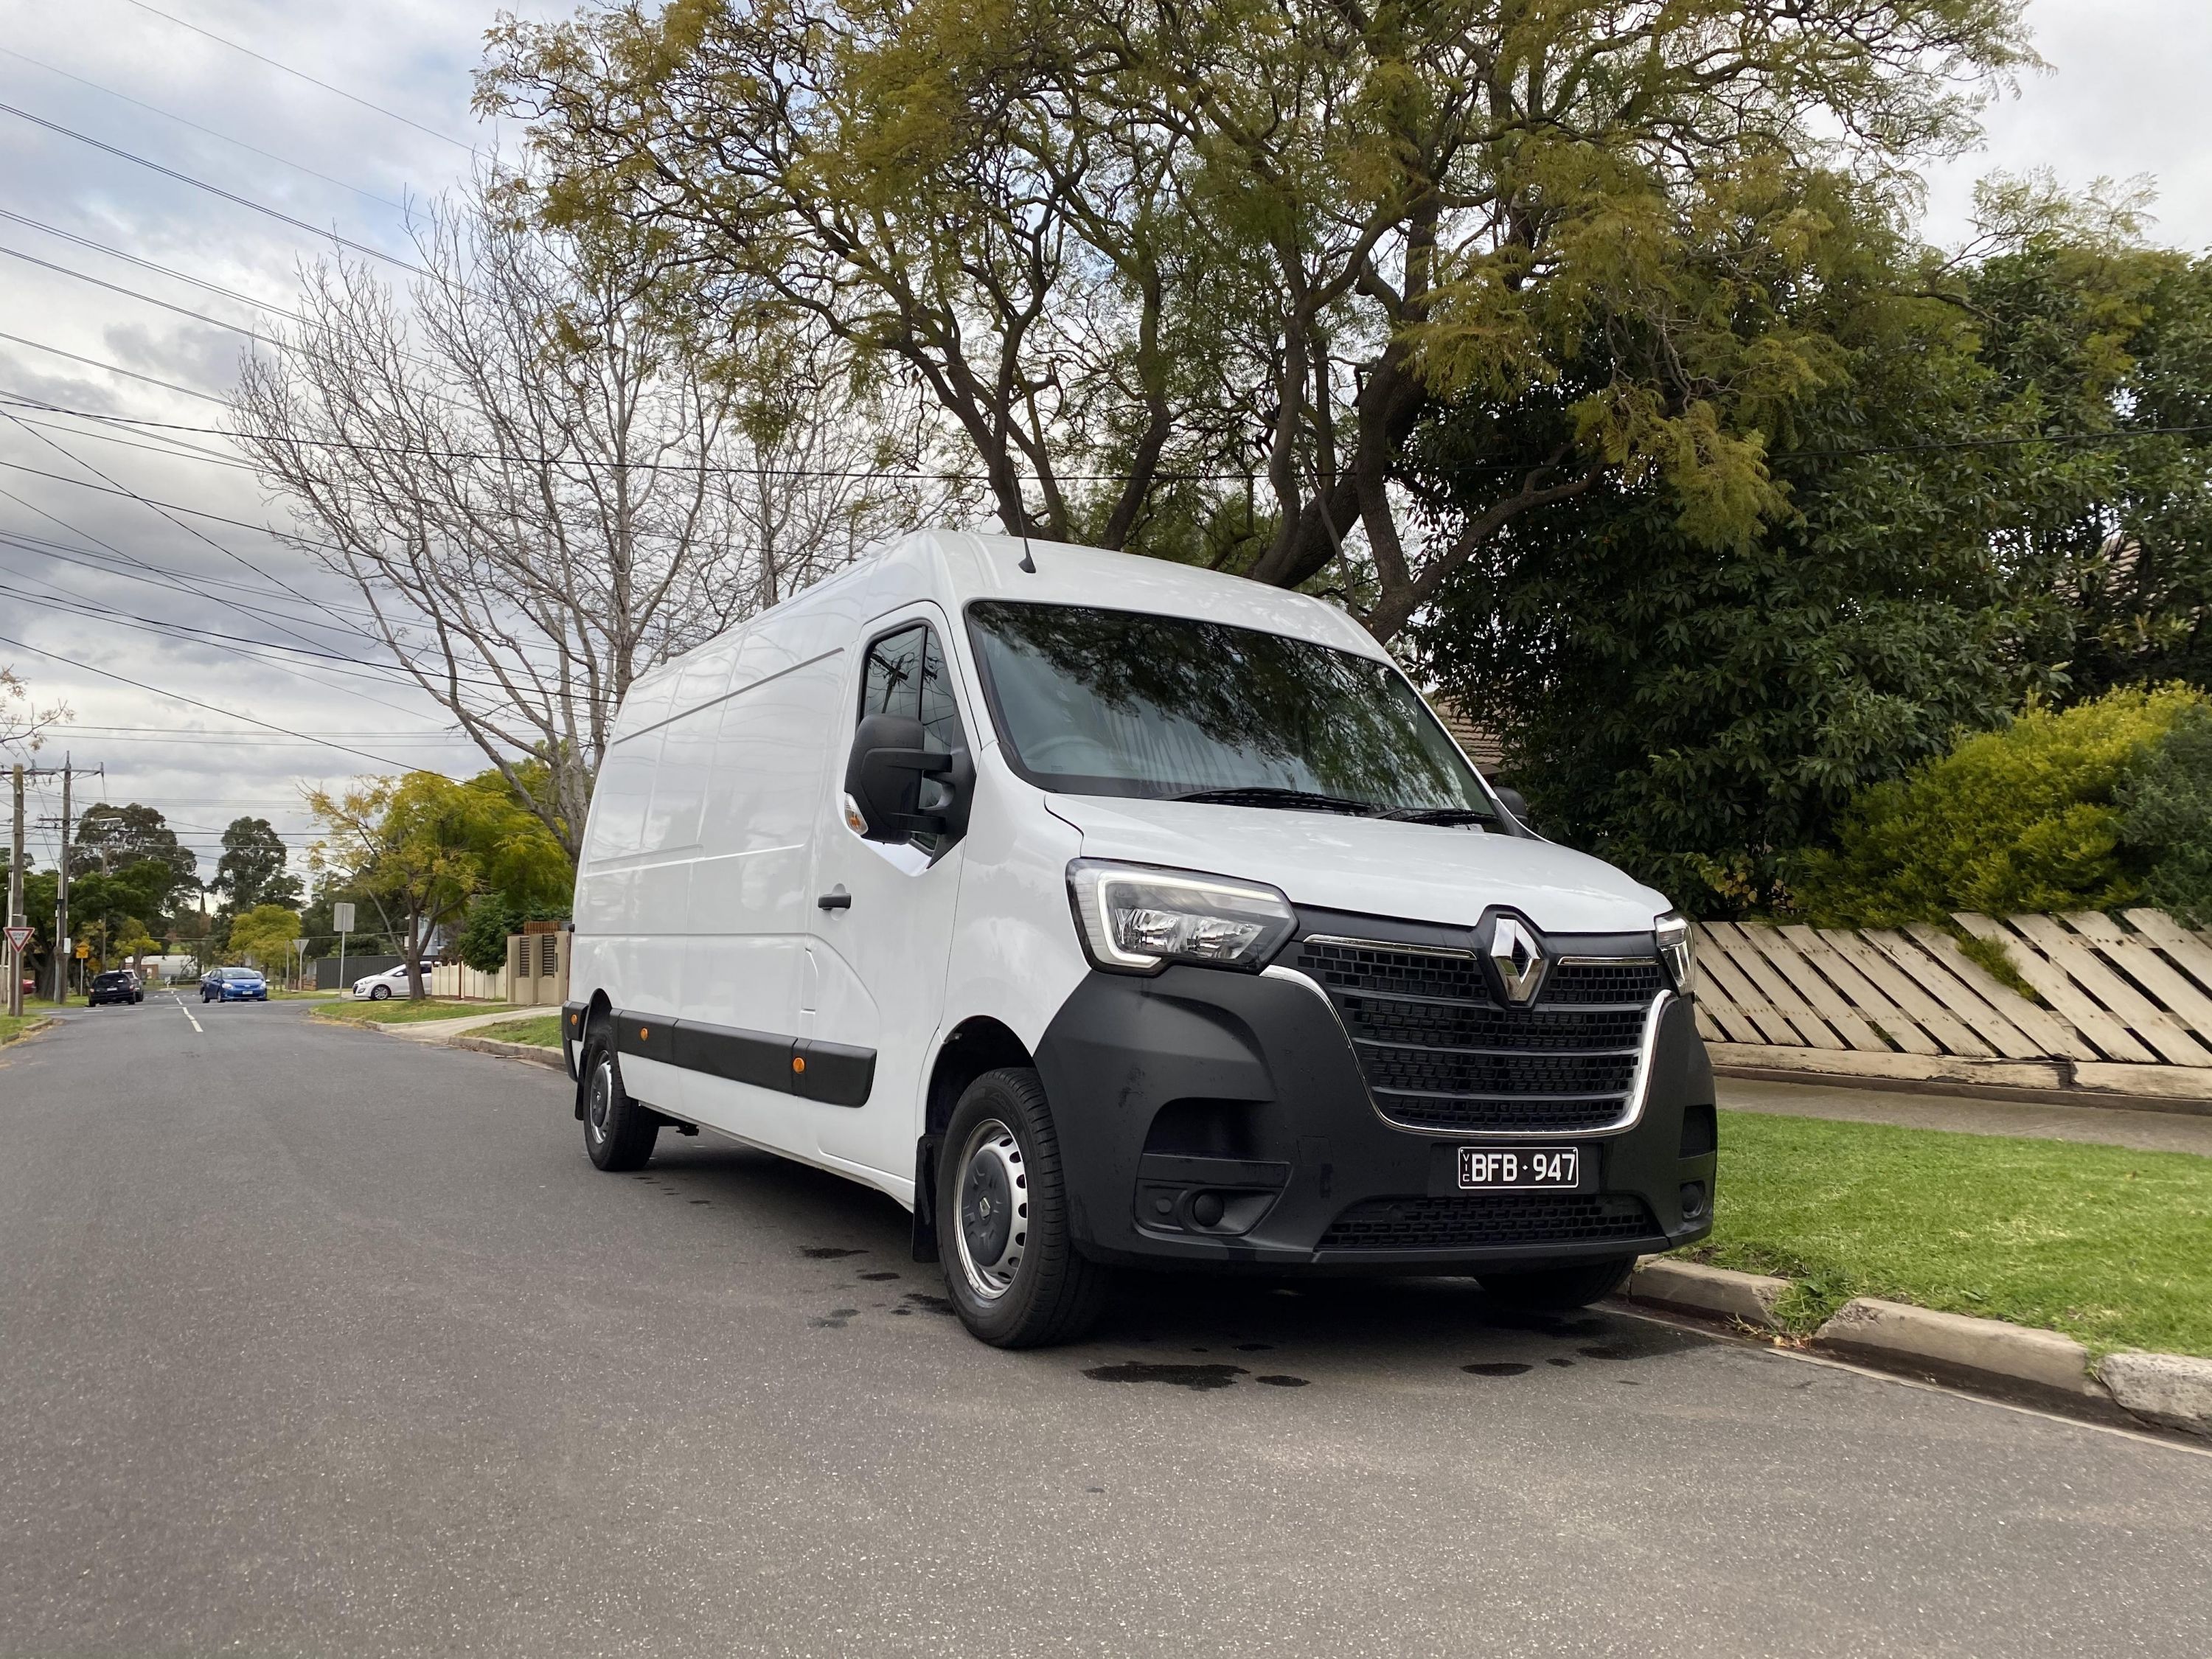 2021 Renault Master mid-wheelbase (MWB) review - Drive